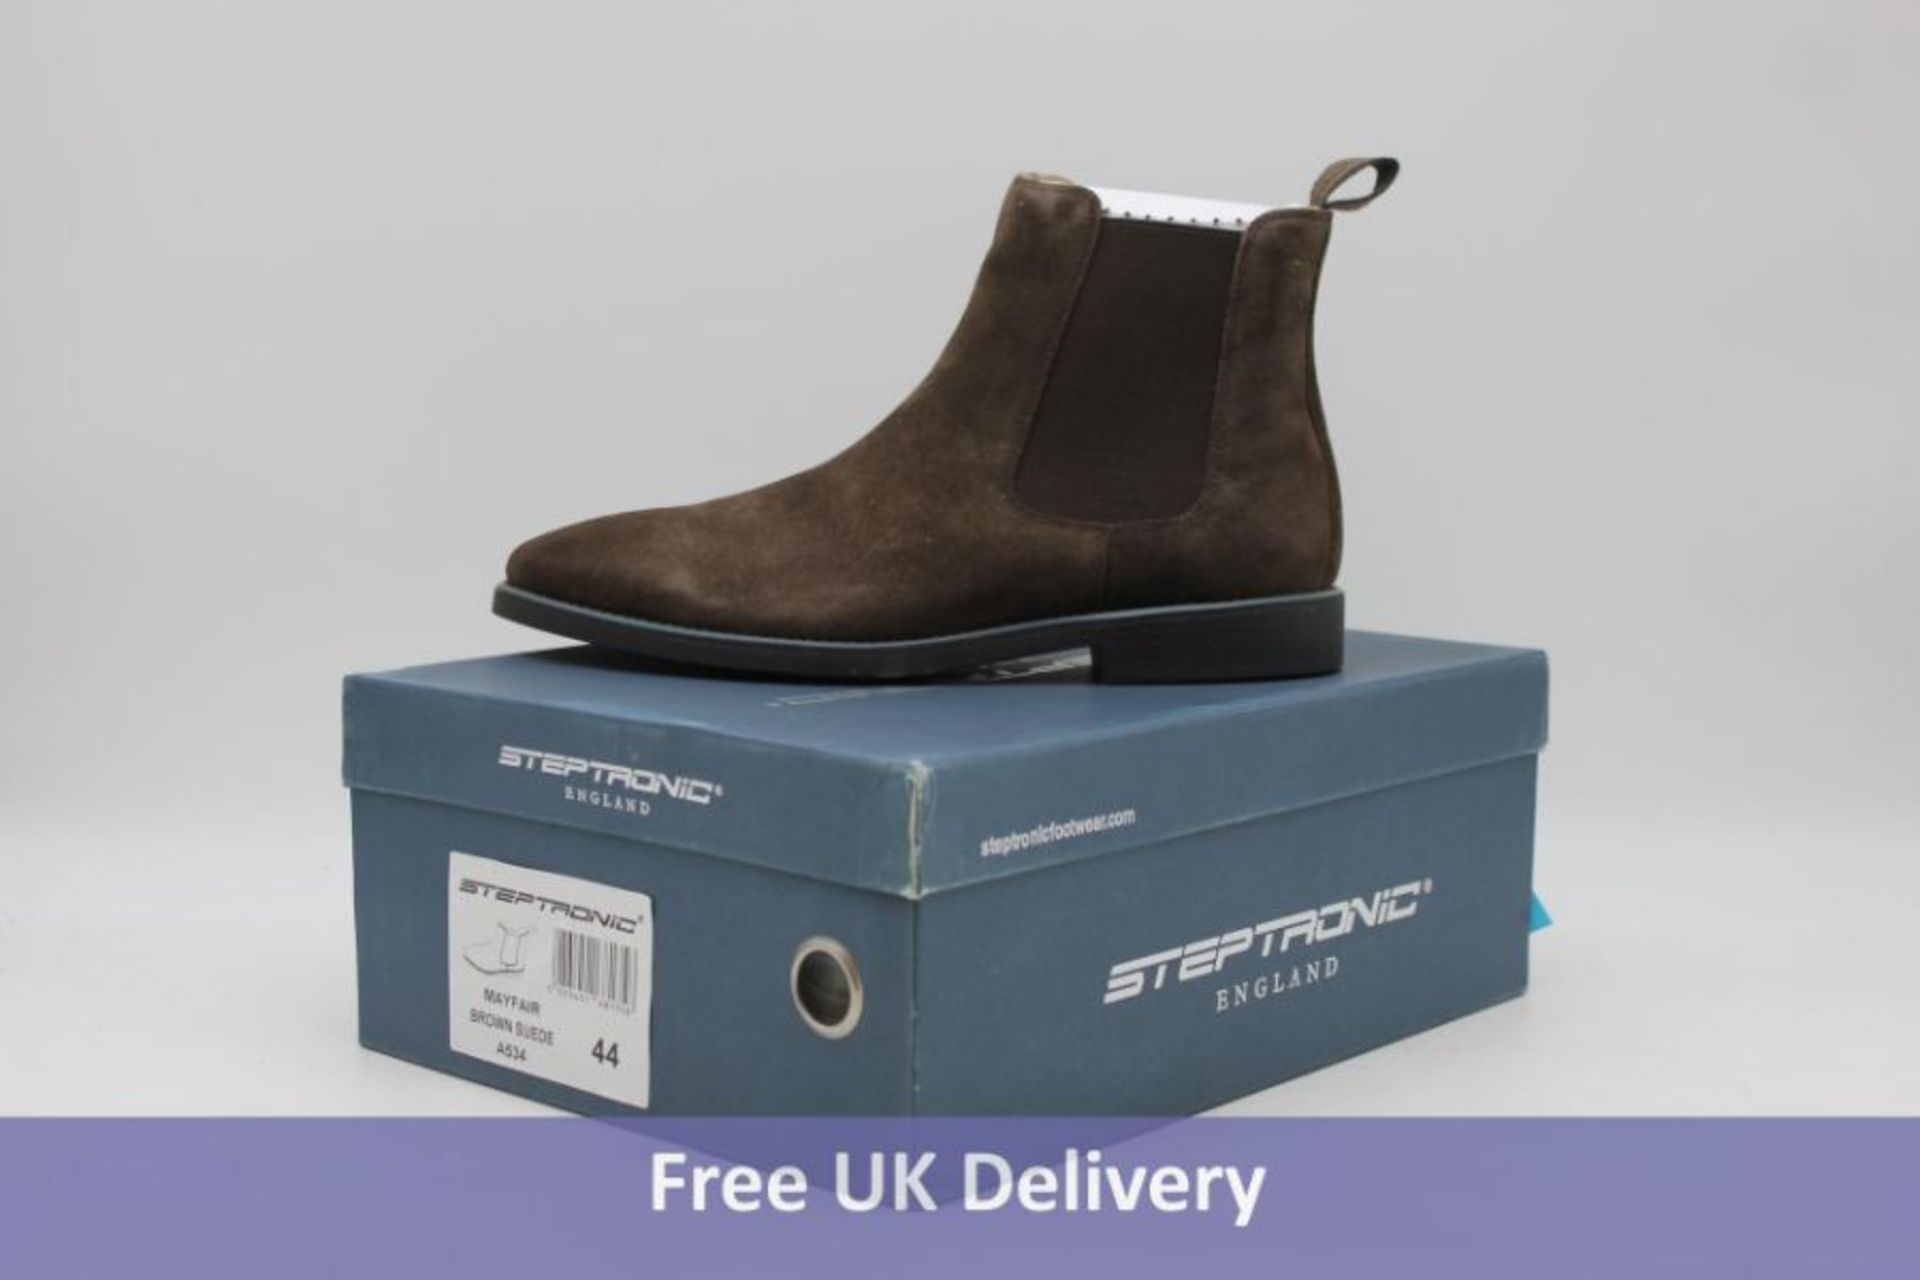 Steptronic Men's Mayfair Boots, Brown Suede, 46. Box damaged